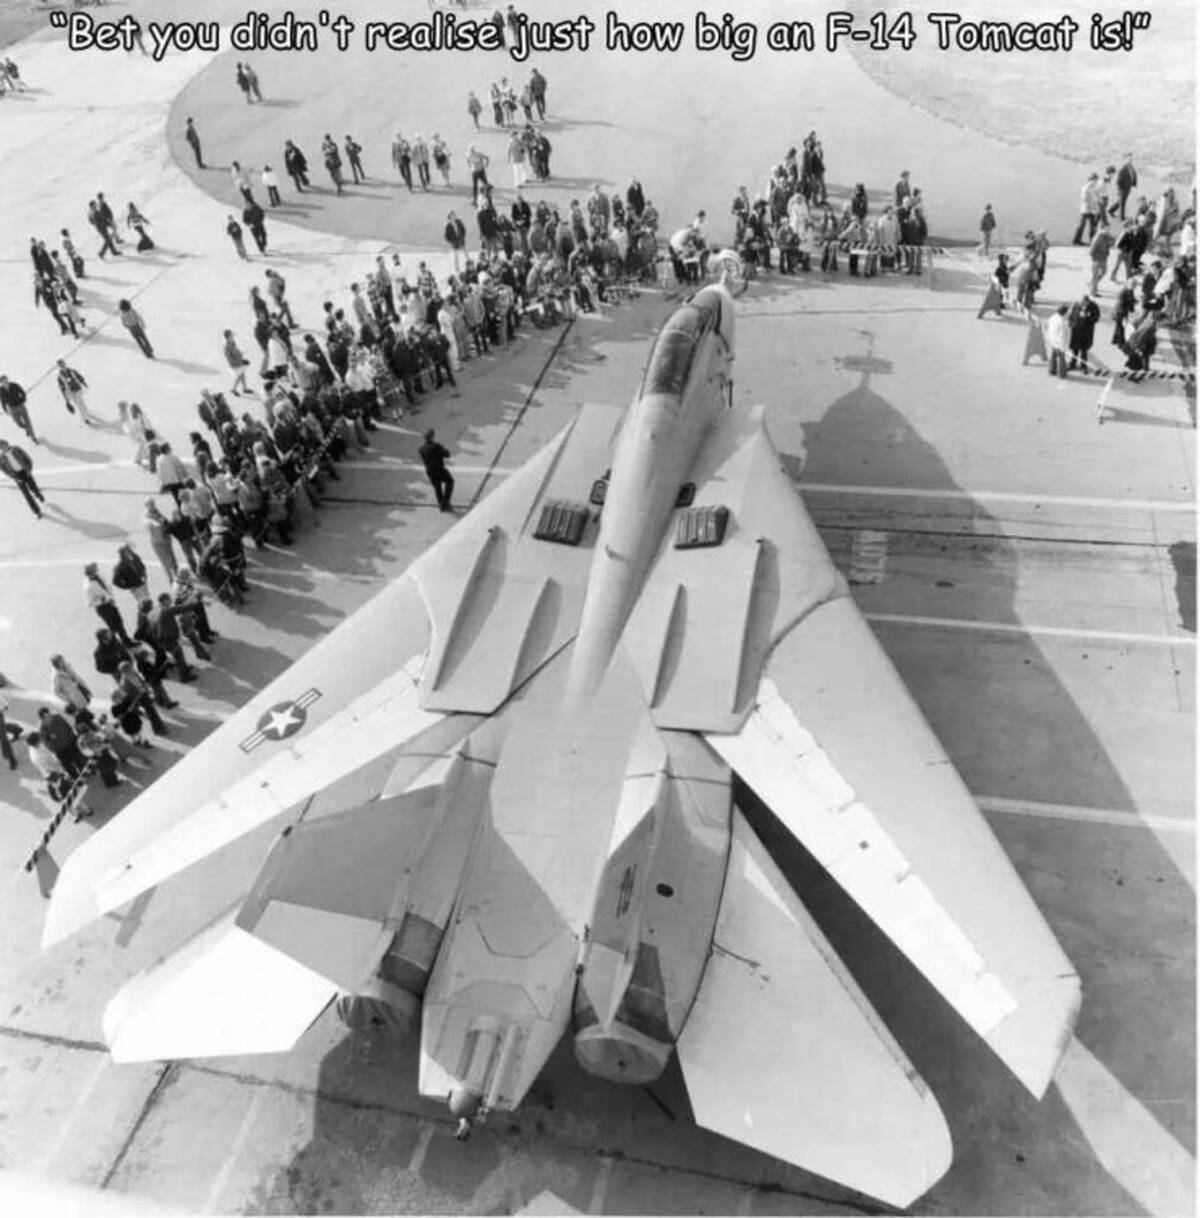 big is the f 14 - "Bet you didn't realise just how big an F14 Tomcat is!"